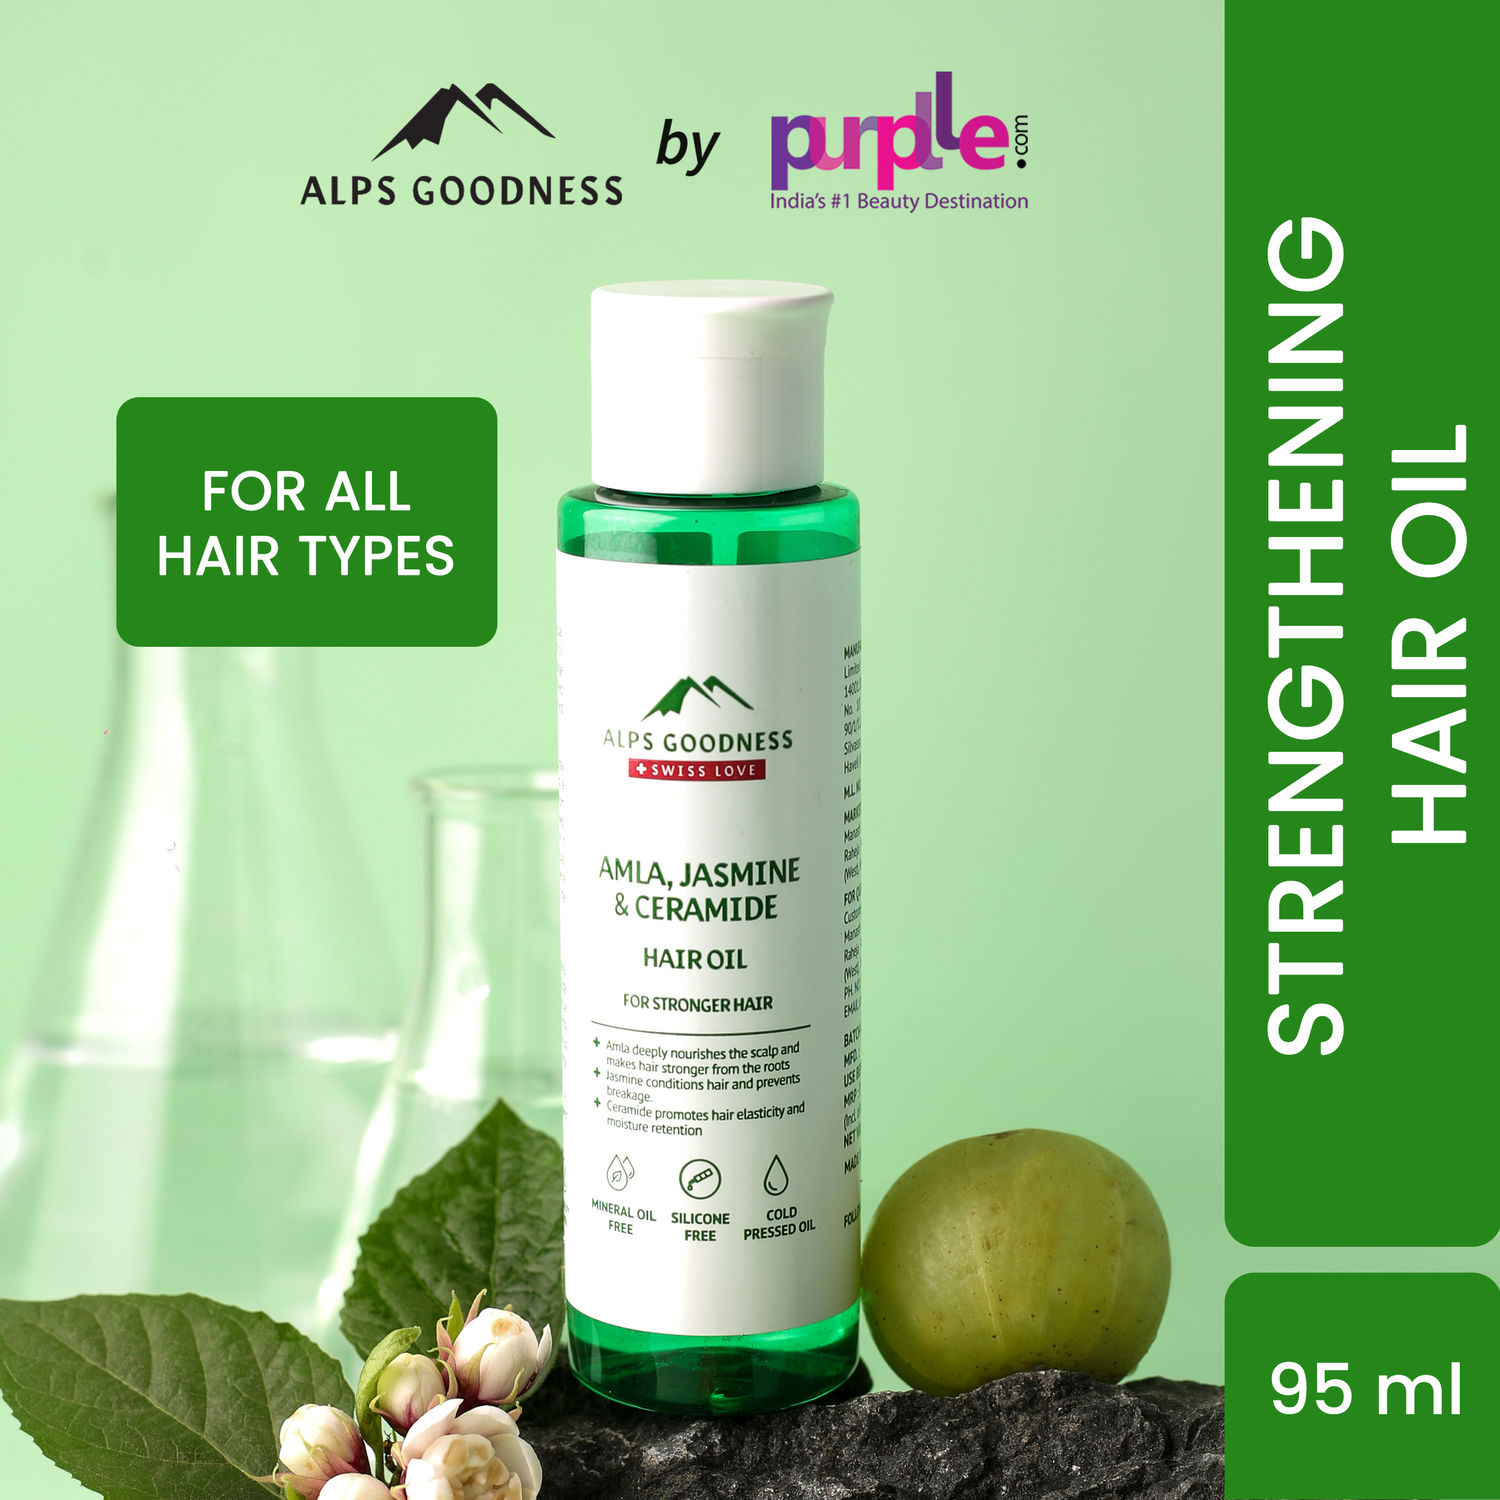 Biotique Advanced Organics Onion Black Seed Hair Oil Buy Biotique Advanced  Organics Onion Black Seed Hair Oil Online at Best Price in India  Nykaa